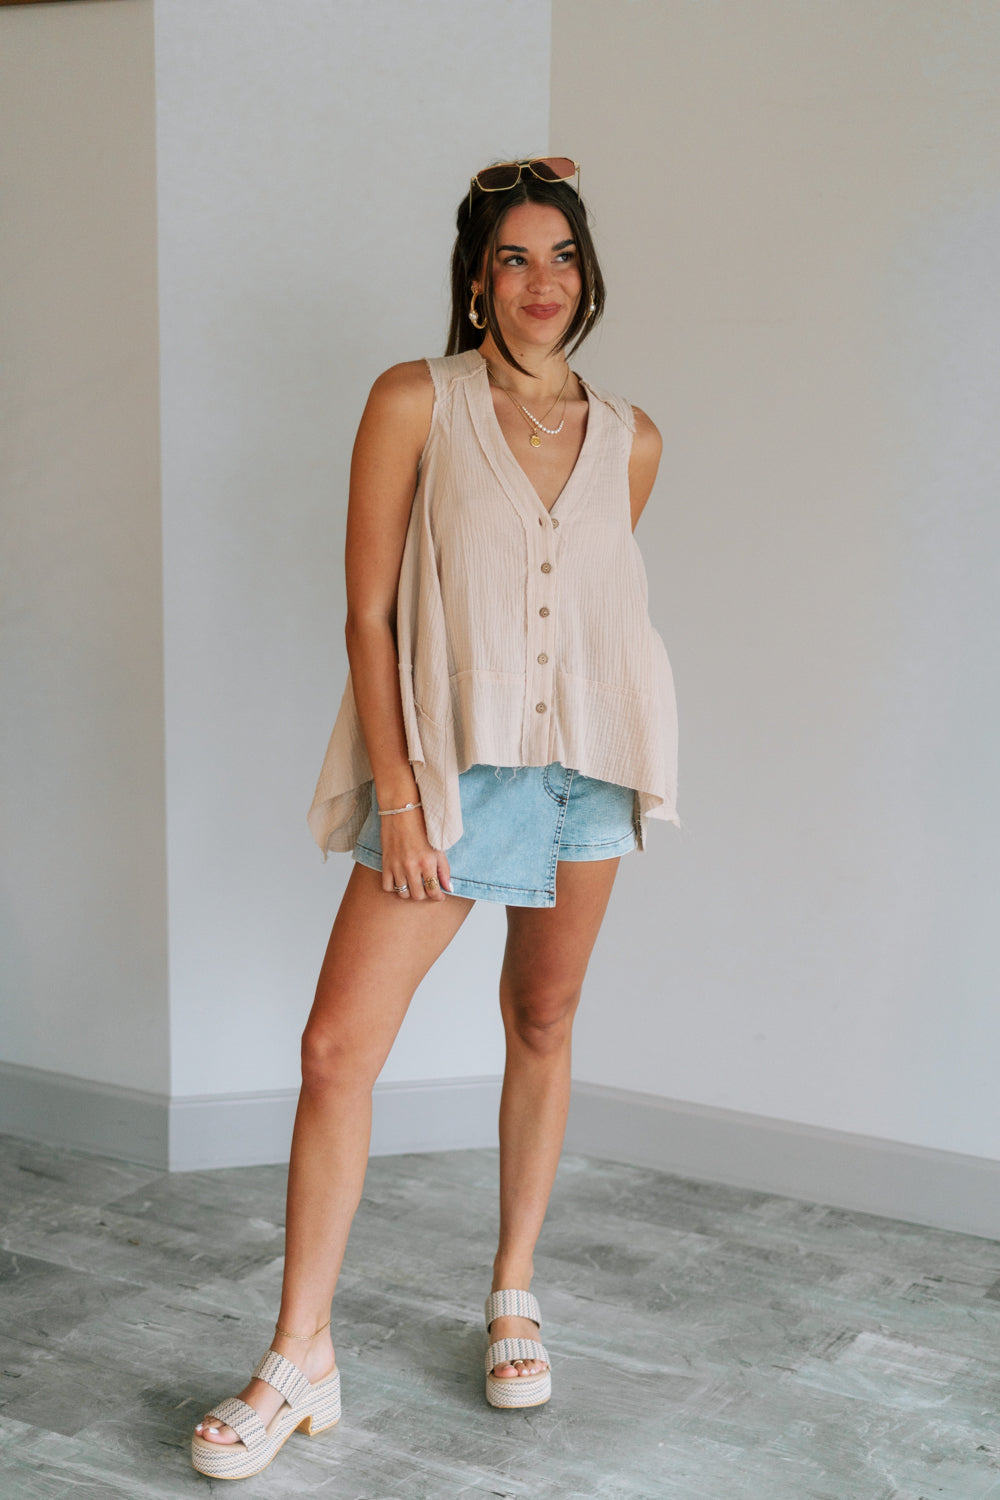 Full body view of female model wearing the Heidi Light Beige Gauze Sleeveless Top which features Taupe Gauze Fabric, Raw Hem, Wooden Button Up and V-Neckline